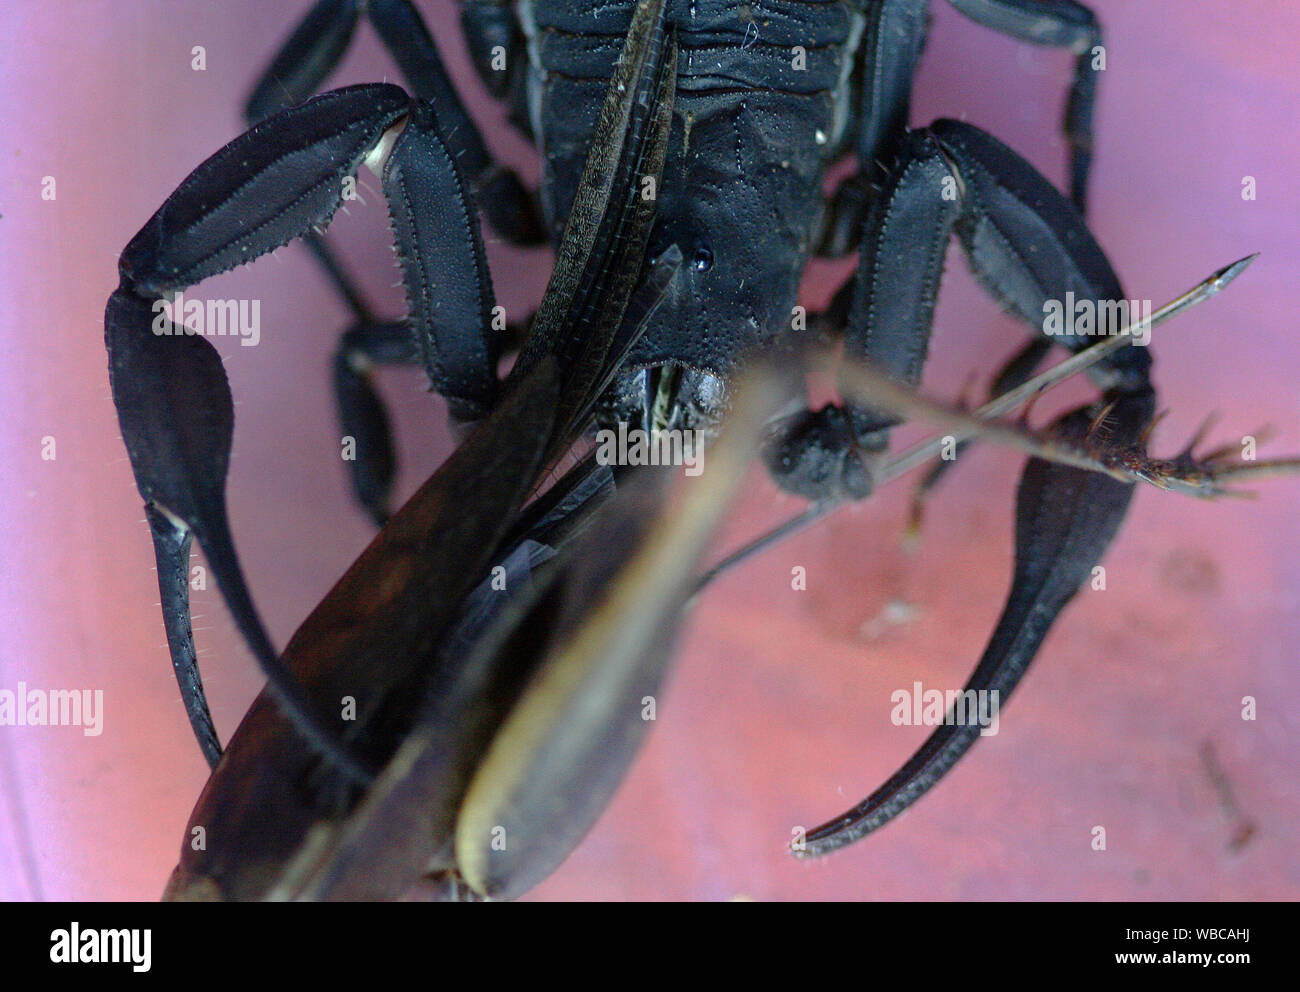 close up of a face of a scorpion (Tityus Obscurus) eating a grasshopper on wooden background in french guiana Stock Photo